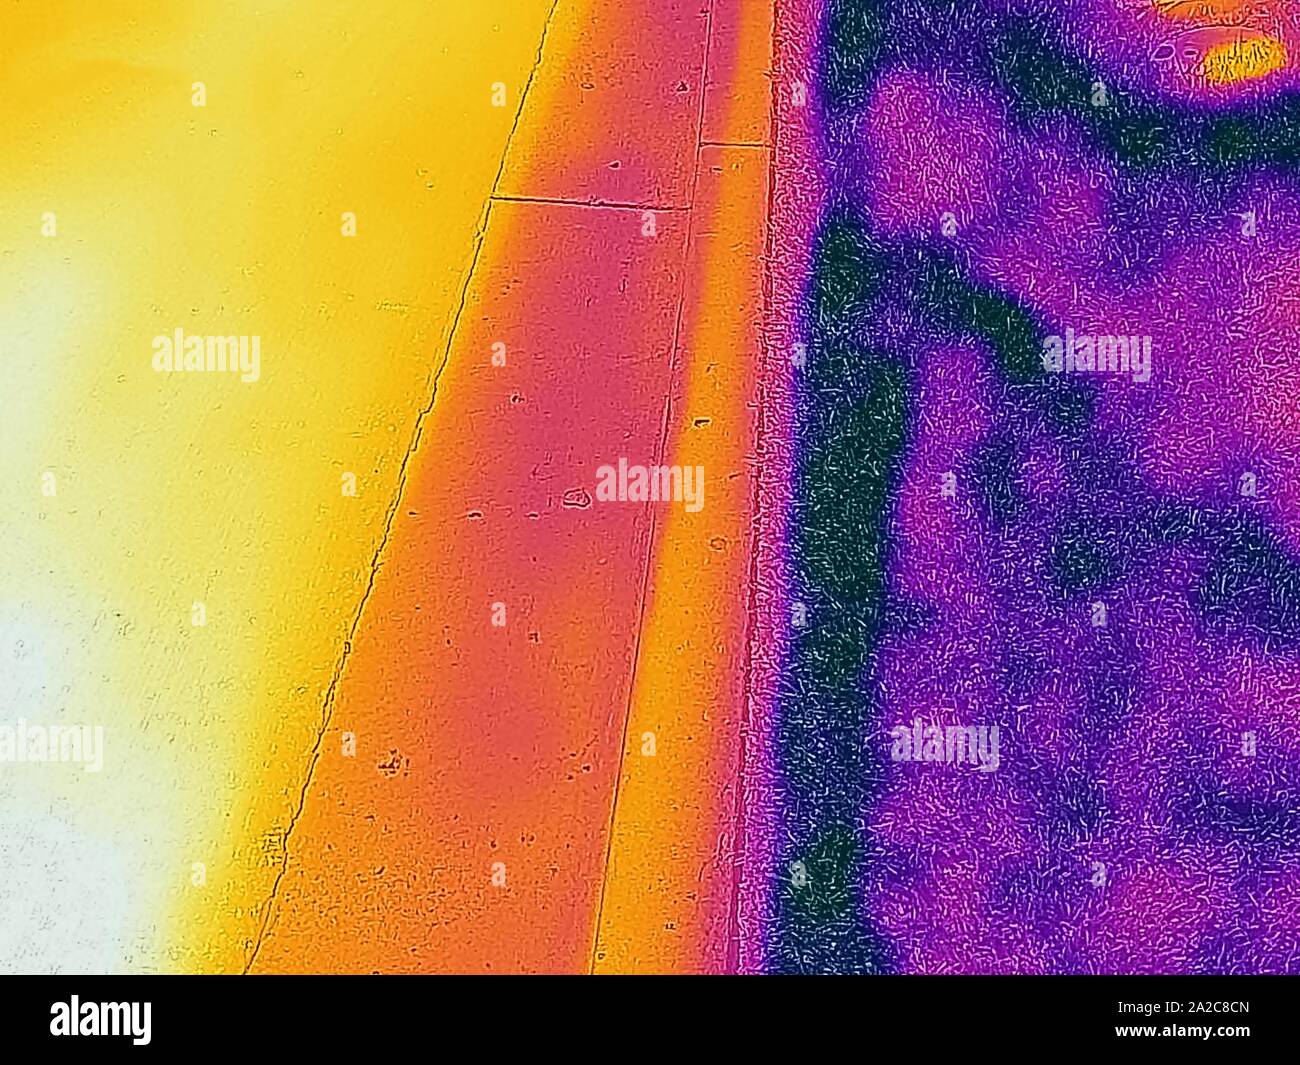 Thermal camera thermographic image, with light areas corresponding to higher temperatures, contrasting (L to R), very hot black asphalt road surface, colder white concrete gutter, and cool grassy area, illustrating the urban heat island effect, in which a greater number of paved surfaces results in higher temperatures in cities, San Ramon, California, September 2, 2019. () Stock Photo